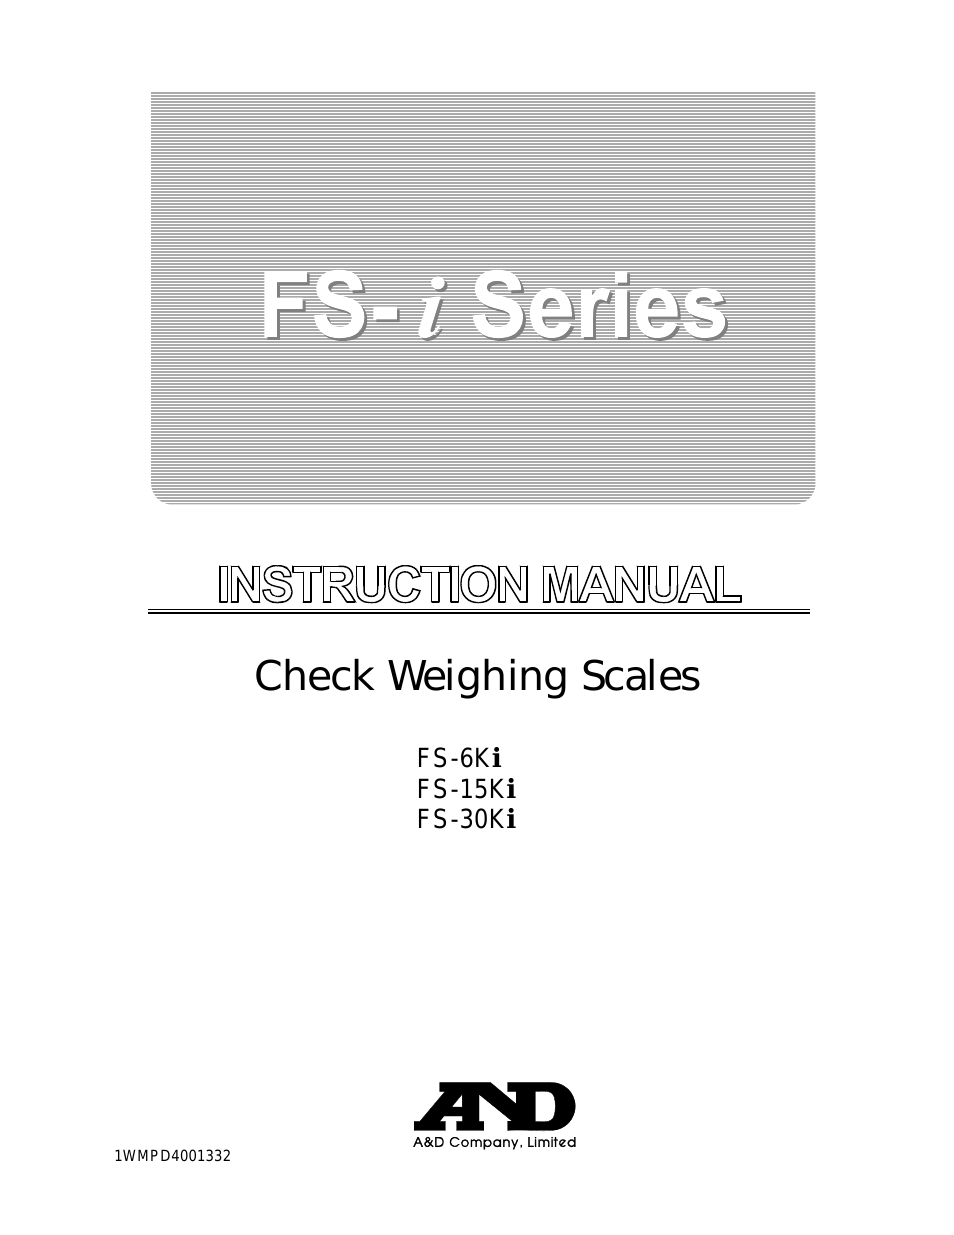 Check Weighing Scales FS-15Ki (Page 1)